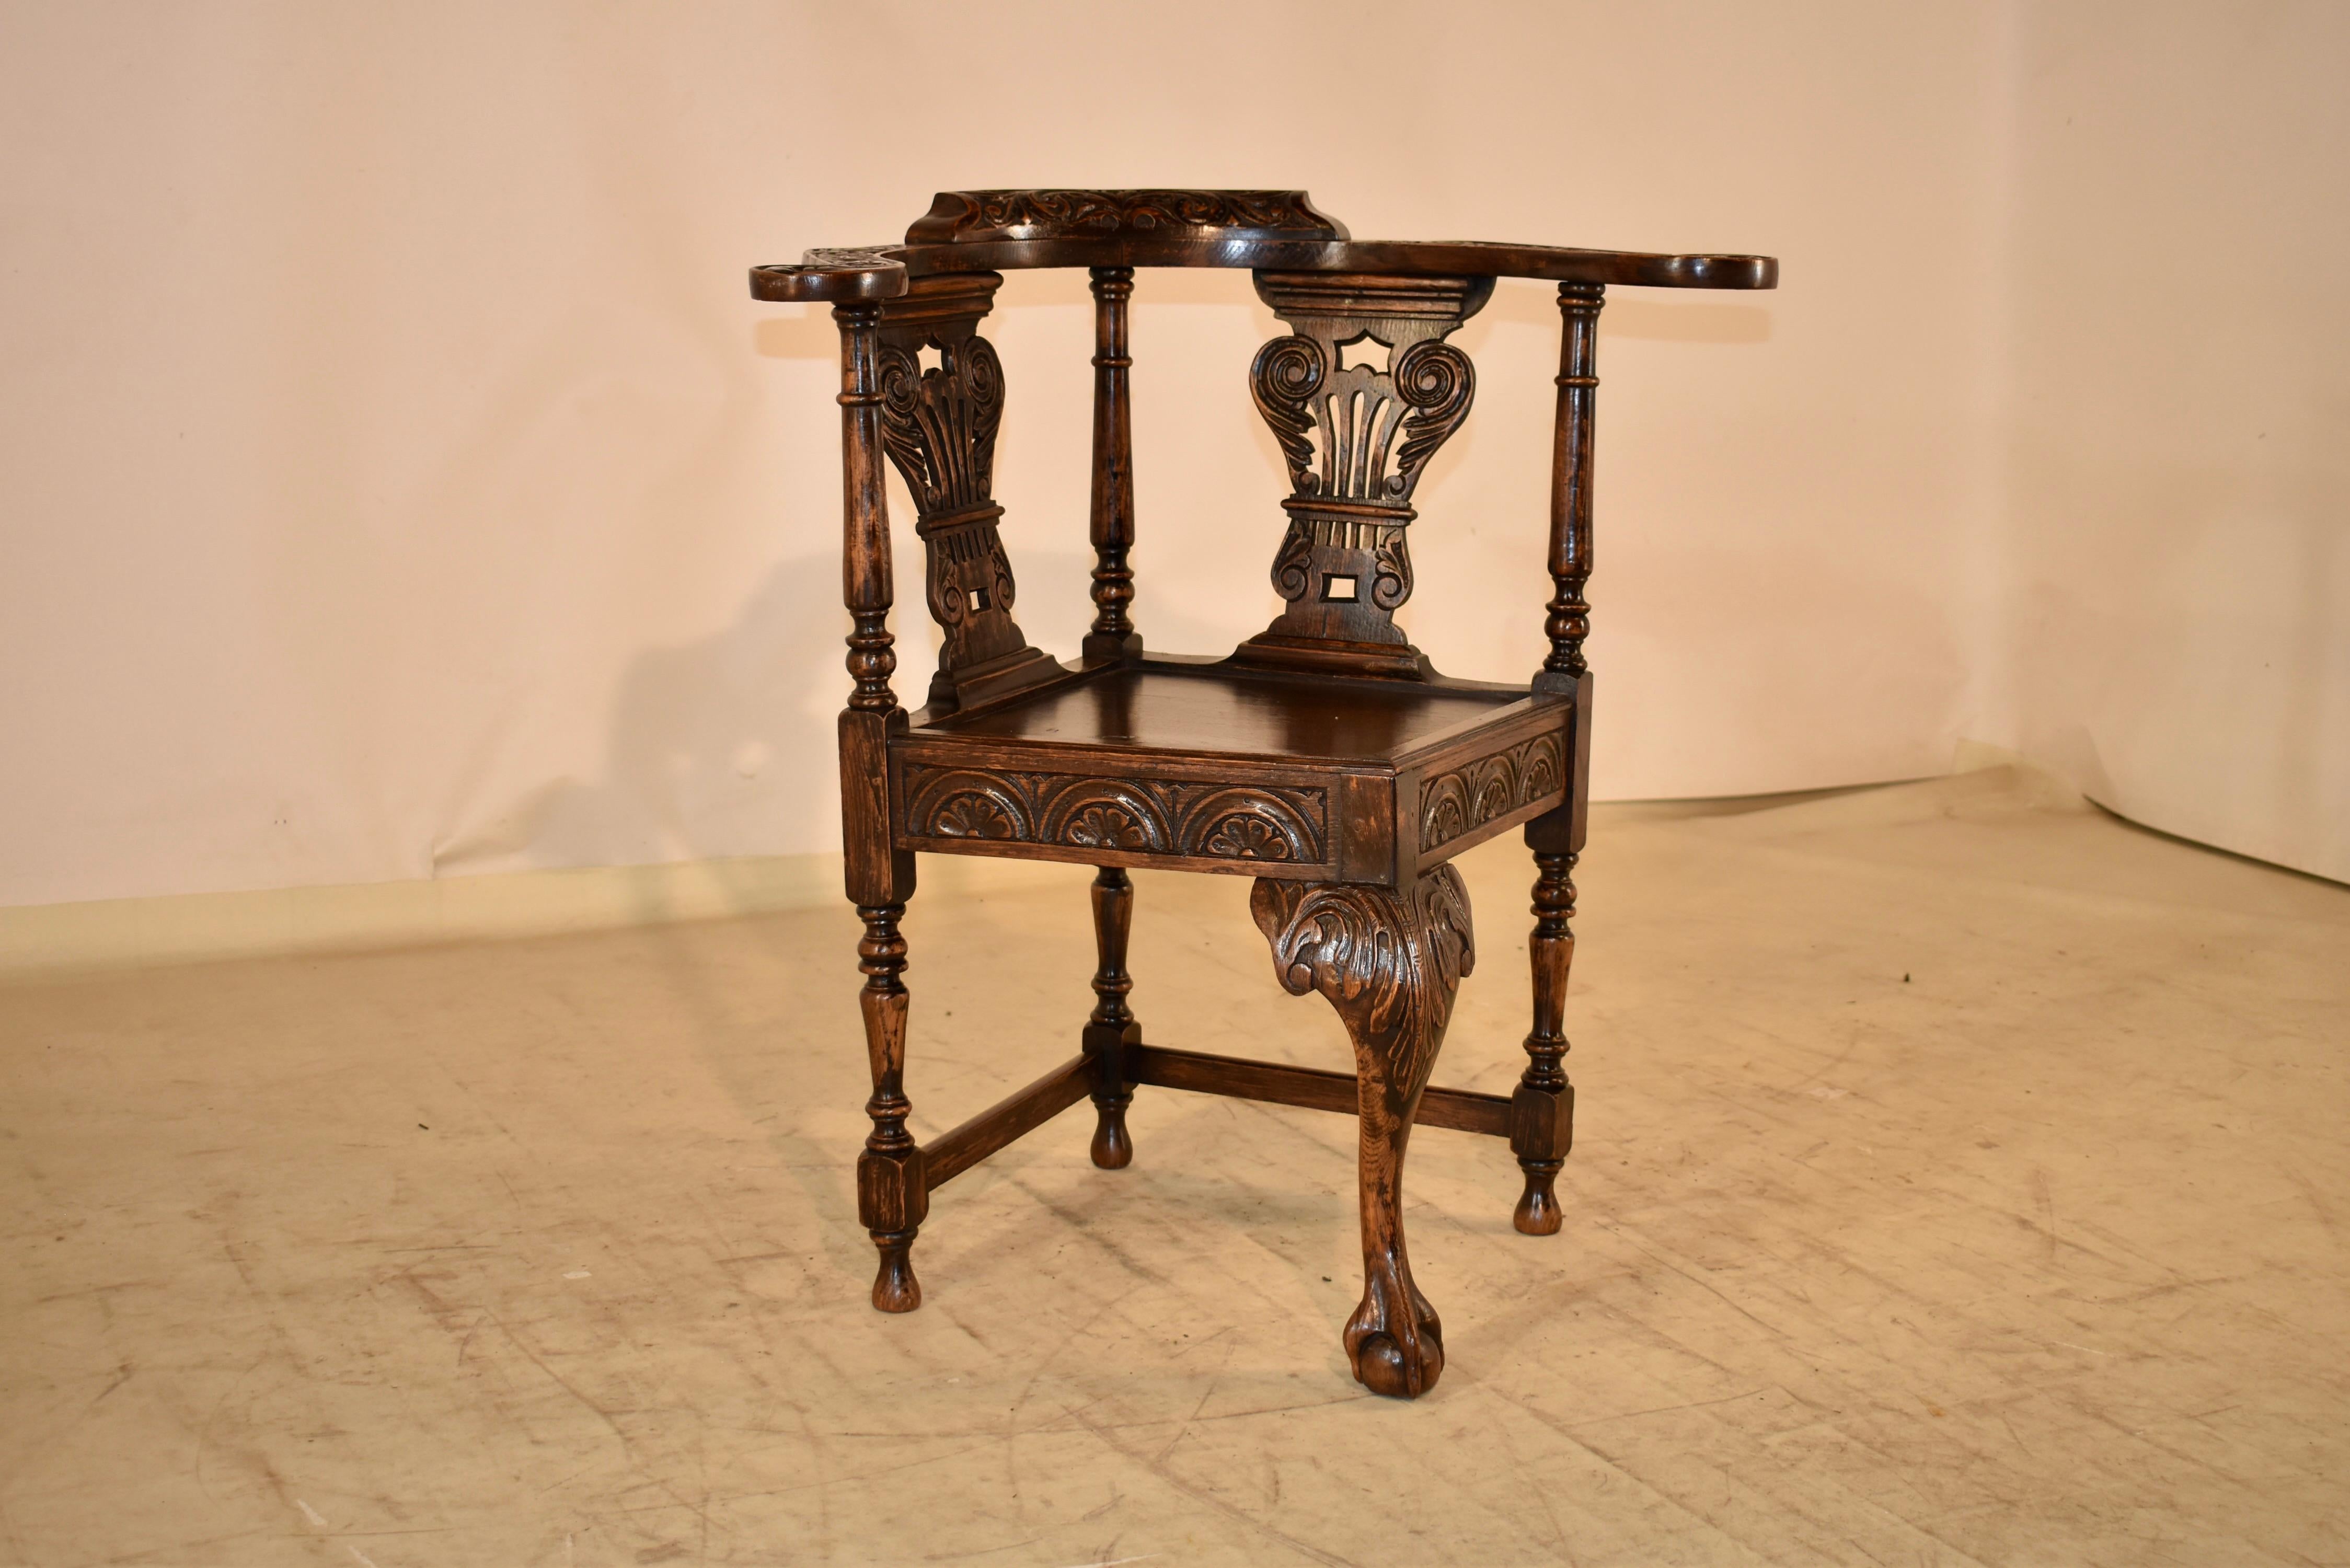 19th century oak corner chair from England.  The arms and back of the chair are wonderfully barrel shaped and embellished with hand carved decorations.  The top rail of the chair is supported on hand turned supports, and there are two pierced and